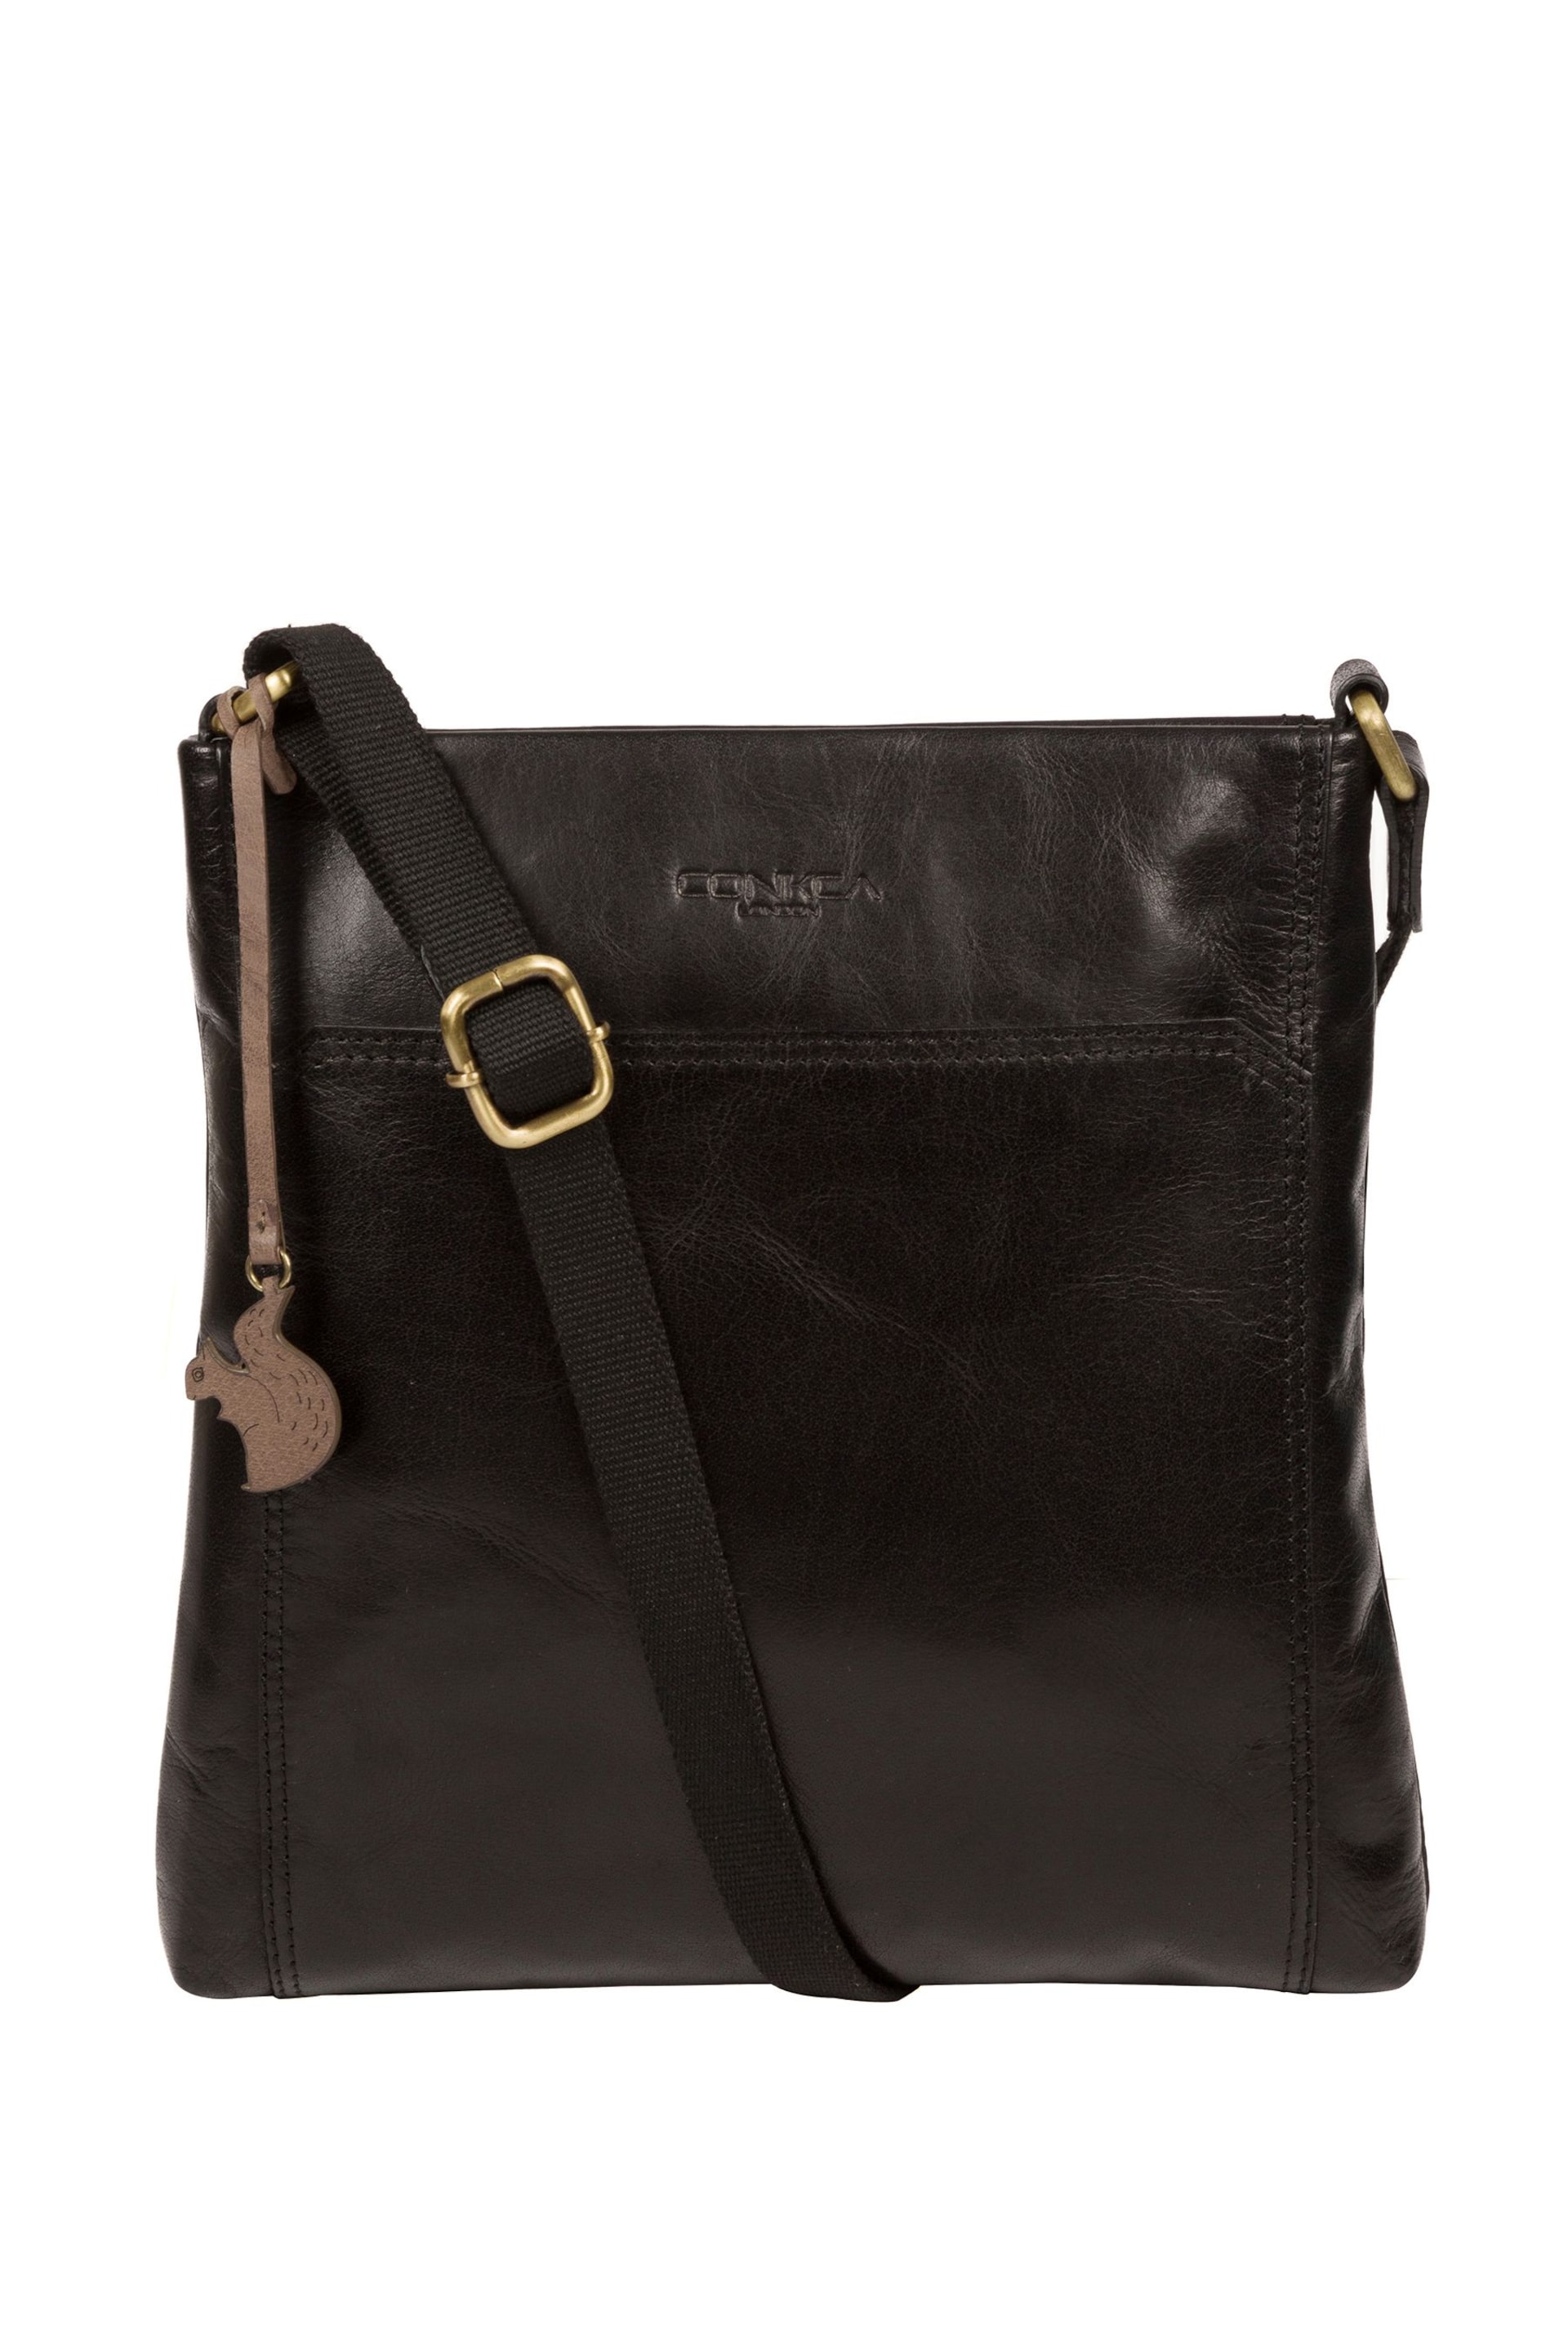 Conkca Dink Leather Cross-Body Bag - Image 5 of 5